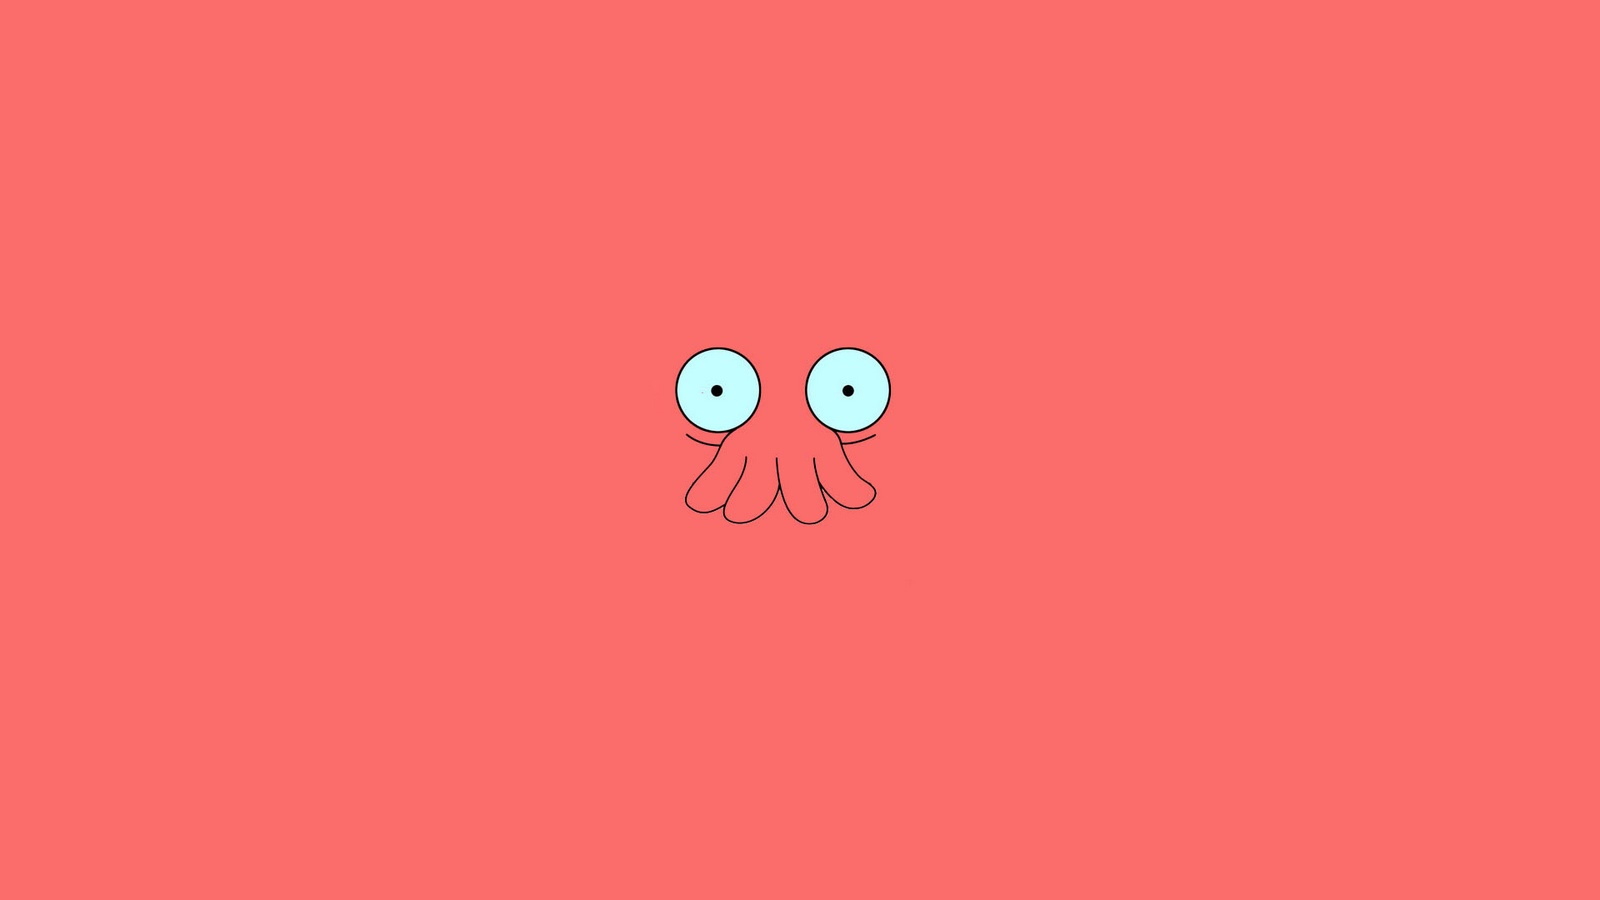 Twisted S Wallpaper Why Not Zoidberg